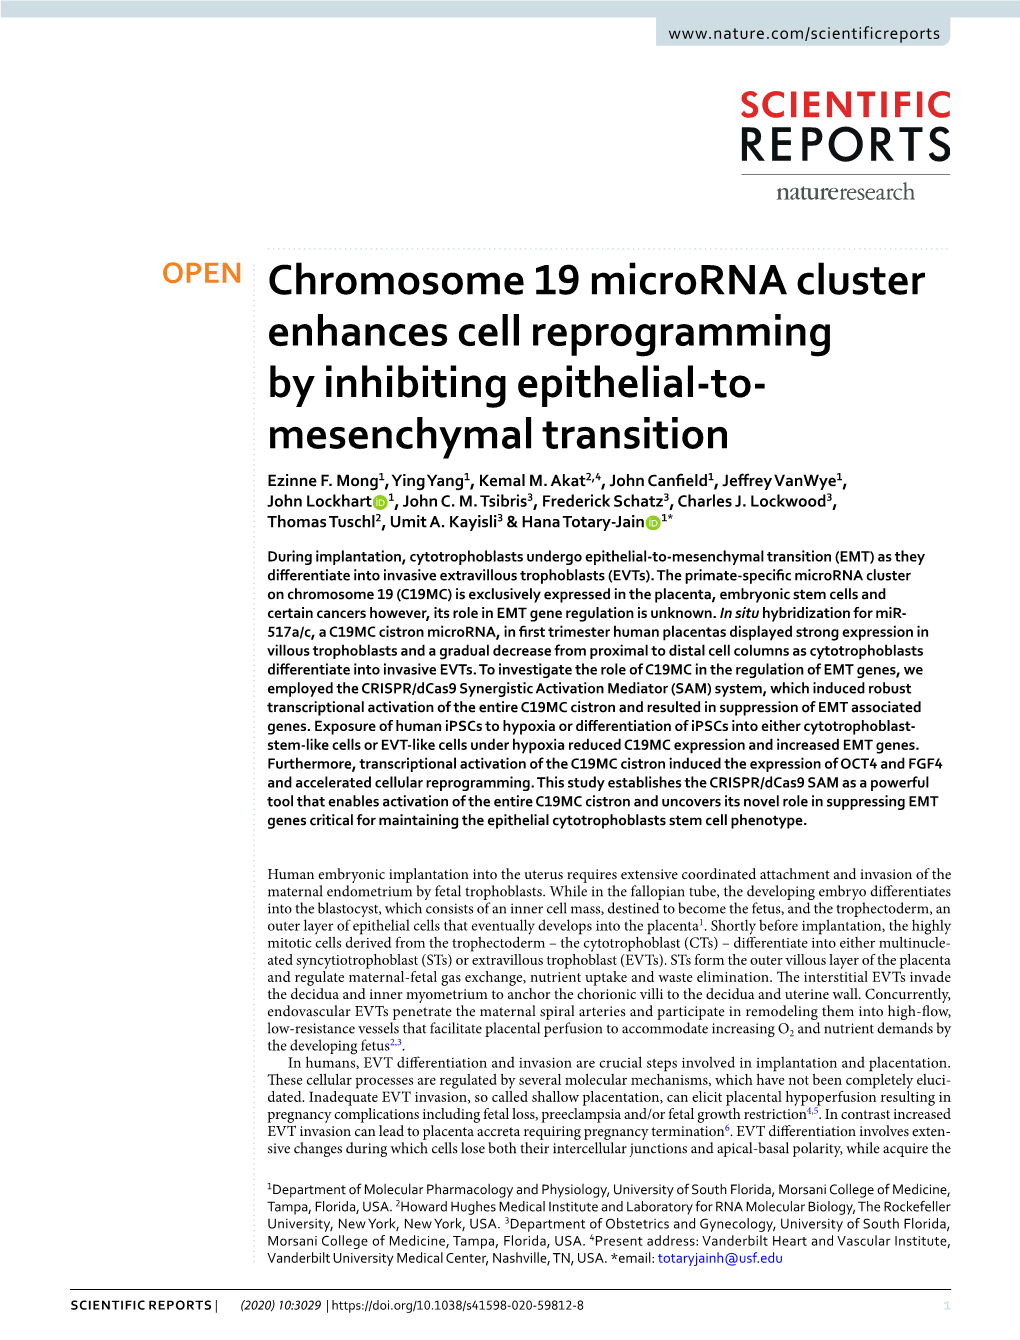 Chromosome 19 Microrna Cluster Enhances Cell Reprogramming by Inhibiting Epithelial-To- Mesenchymal Transition Ezinne F